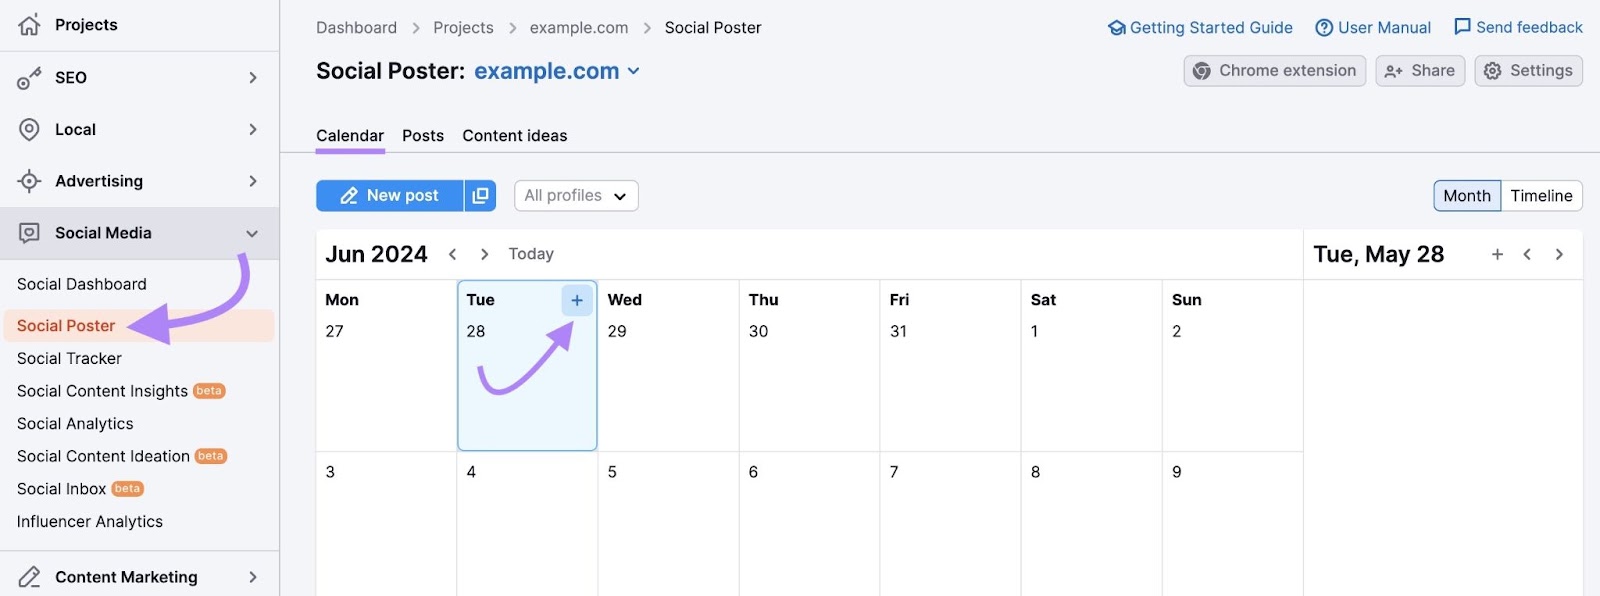 Scheduling a post on Social Poster by clicking the plus icon for a specific day in the calendar view.